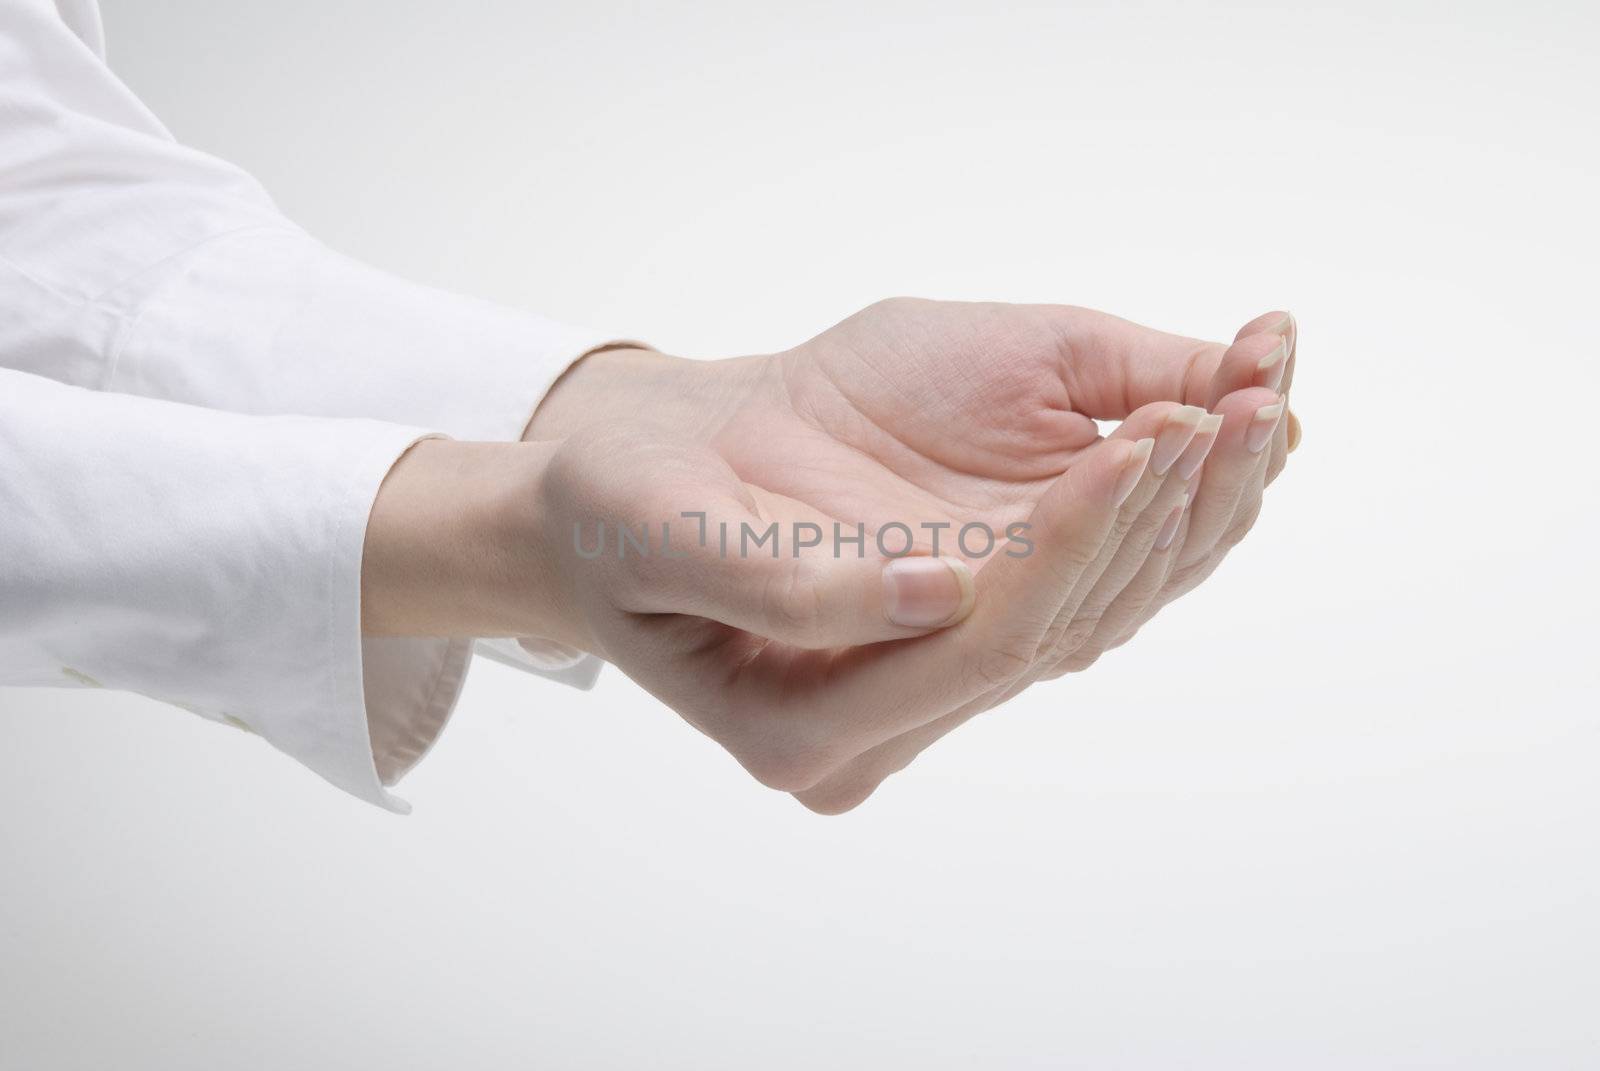 Woman's hand showing support symbol over light background